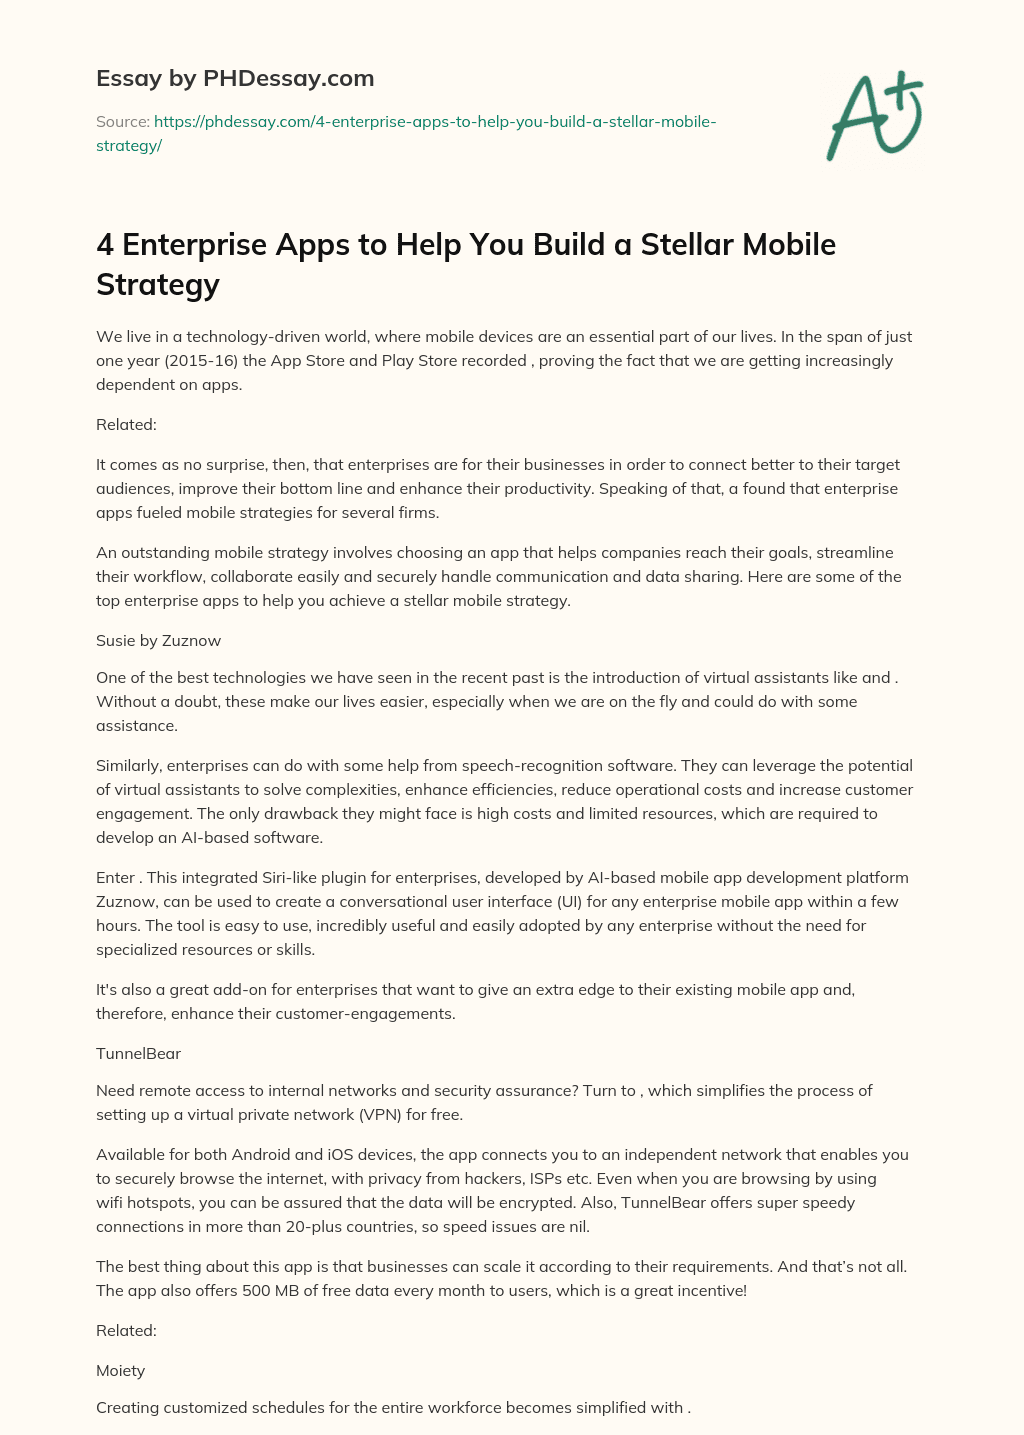 4 Enterprise Apps to Help You Build a Stellar Mobile Strategy essay